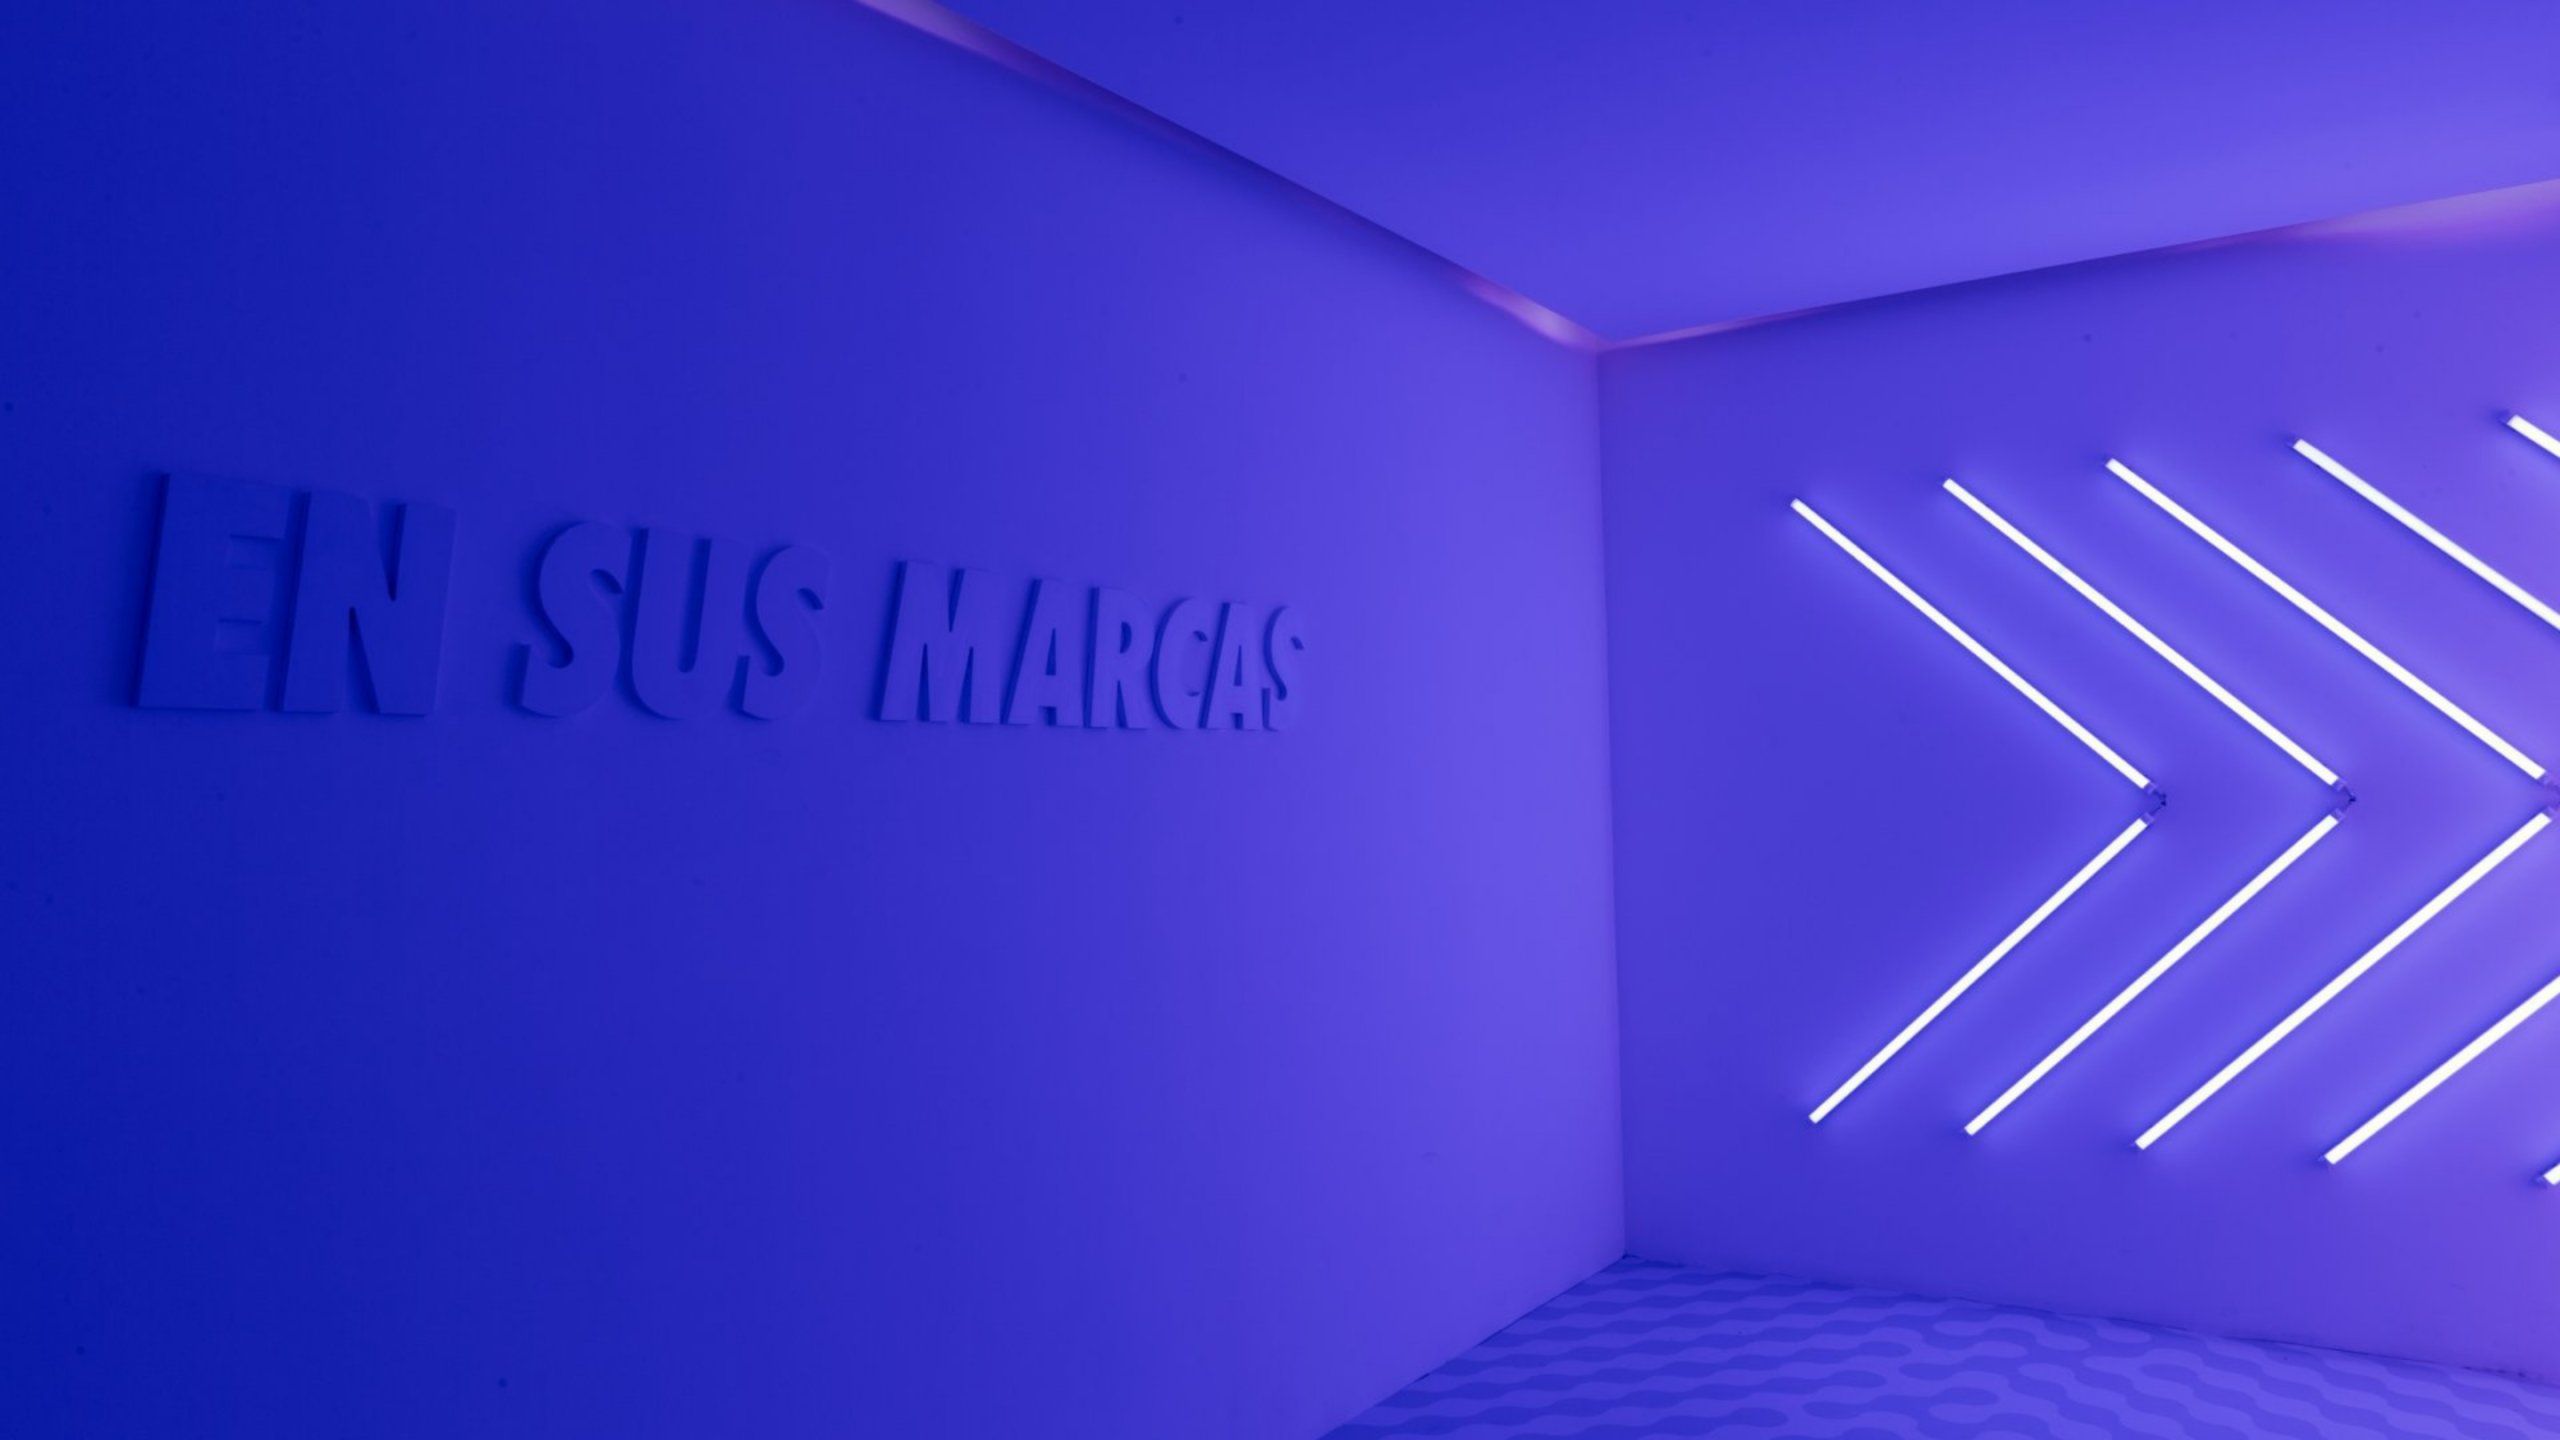 Purple room in installation. Zig zag carpet like sole of Nike React shoe, one wall has neon arrows, the other wall has text En sus marcas